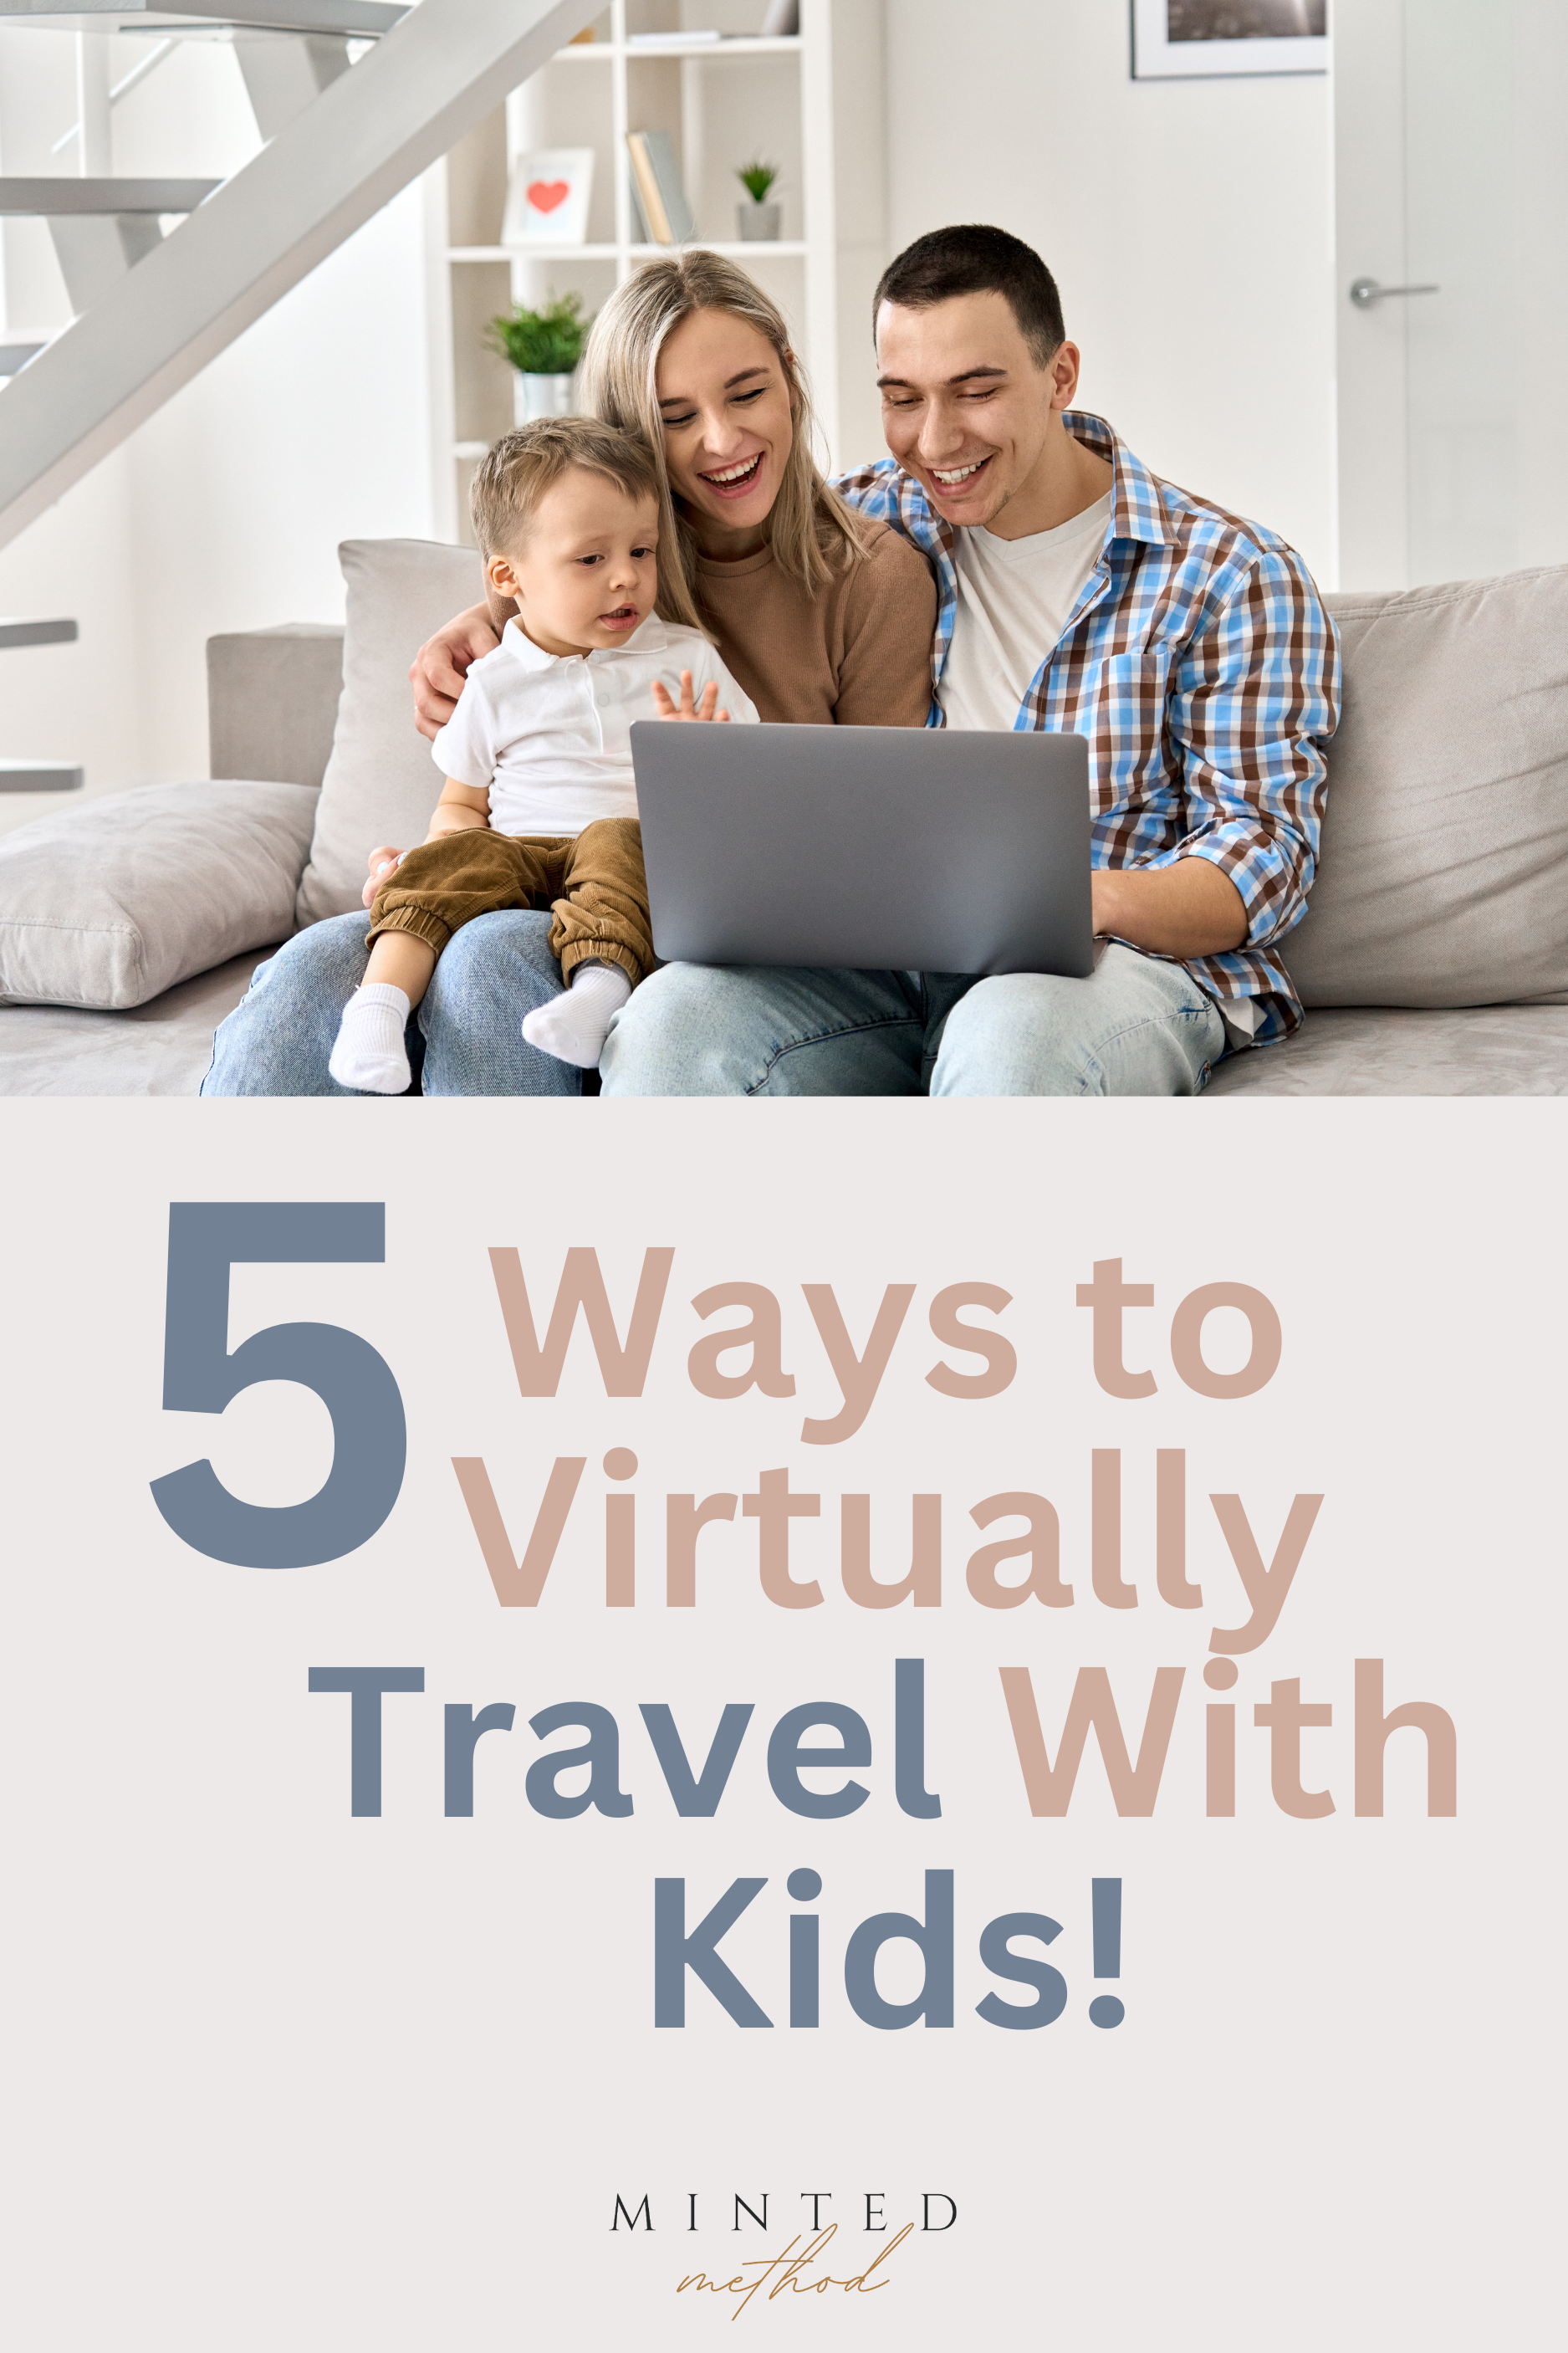 5 Ways to Virtually Travel With Kids!